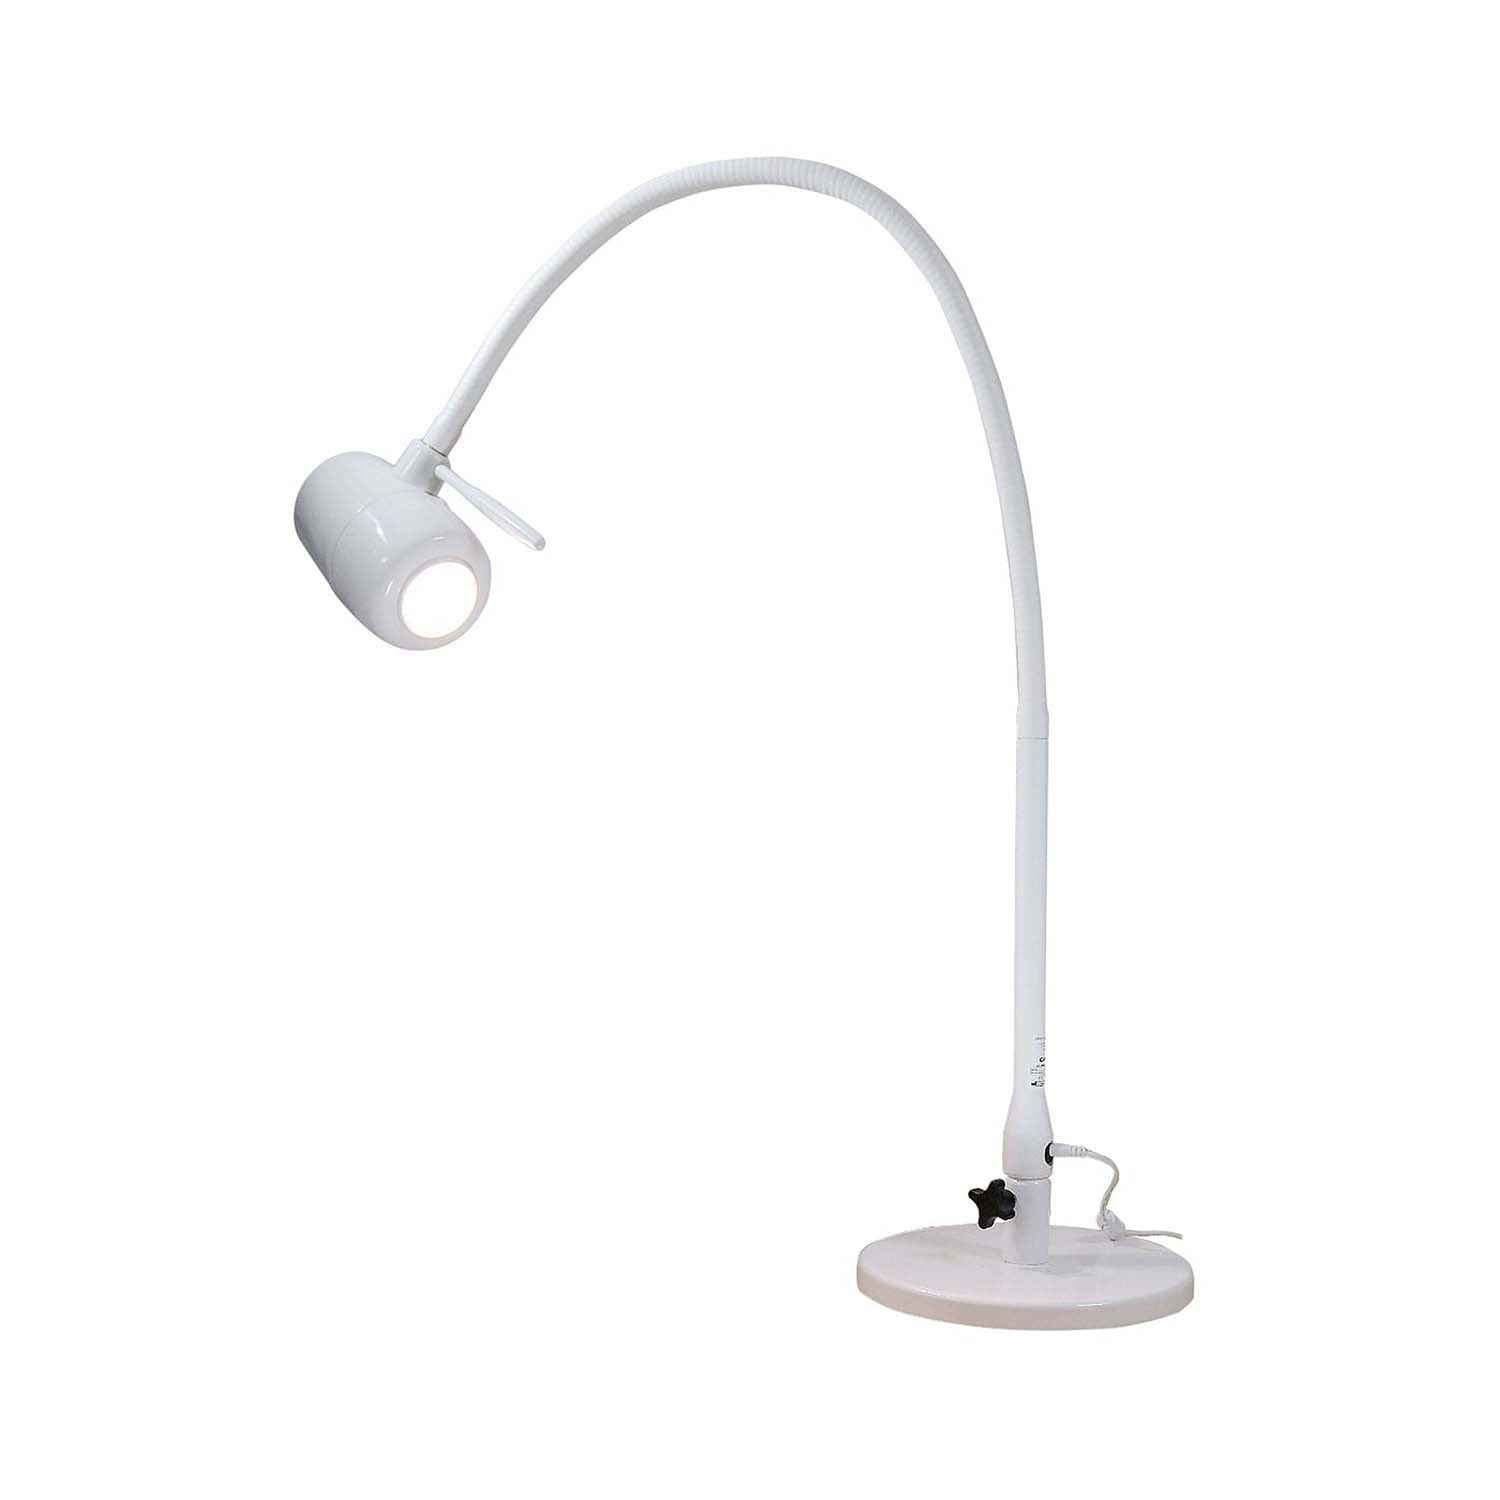 Daray X2 Series LED Examination Light  | Weighted Desk Stand